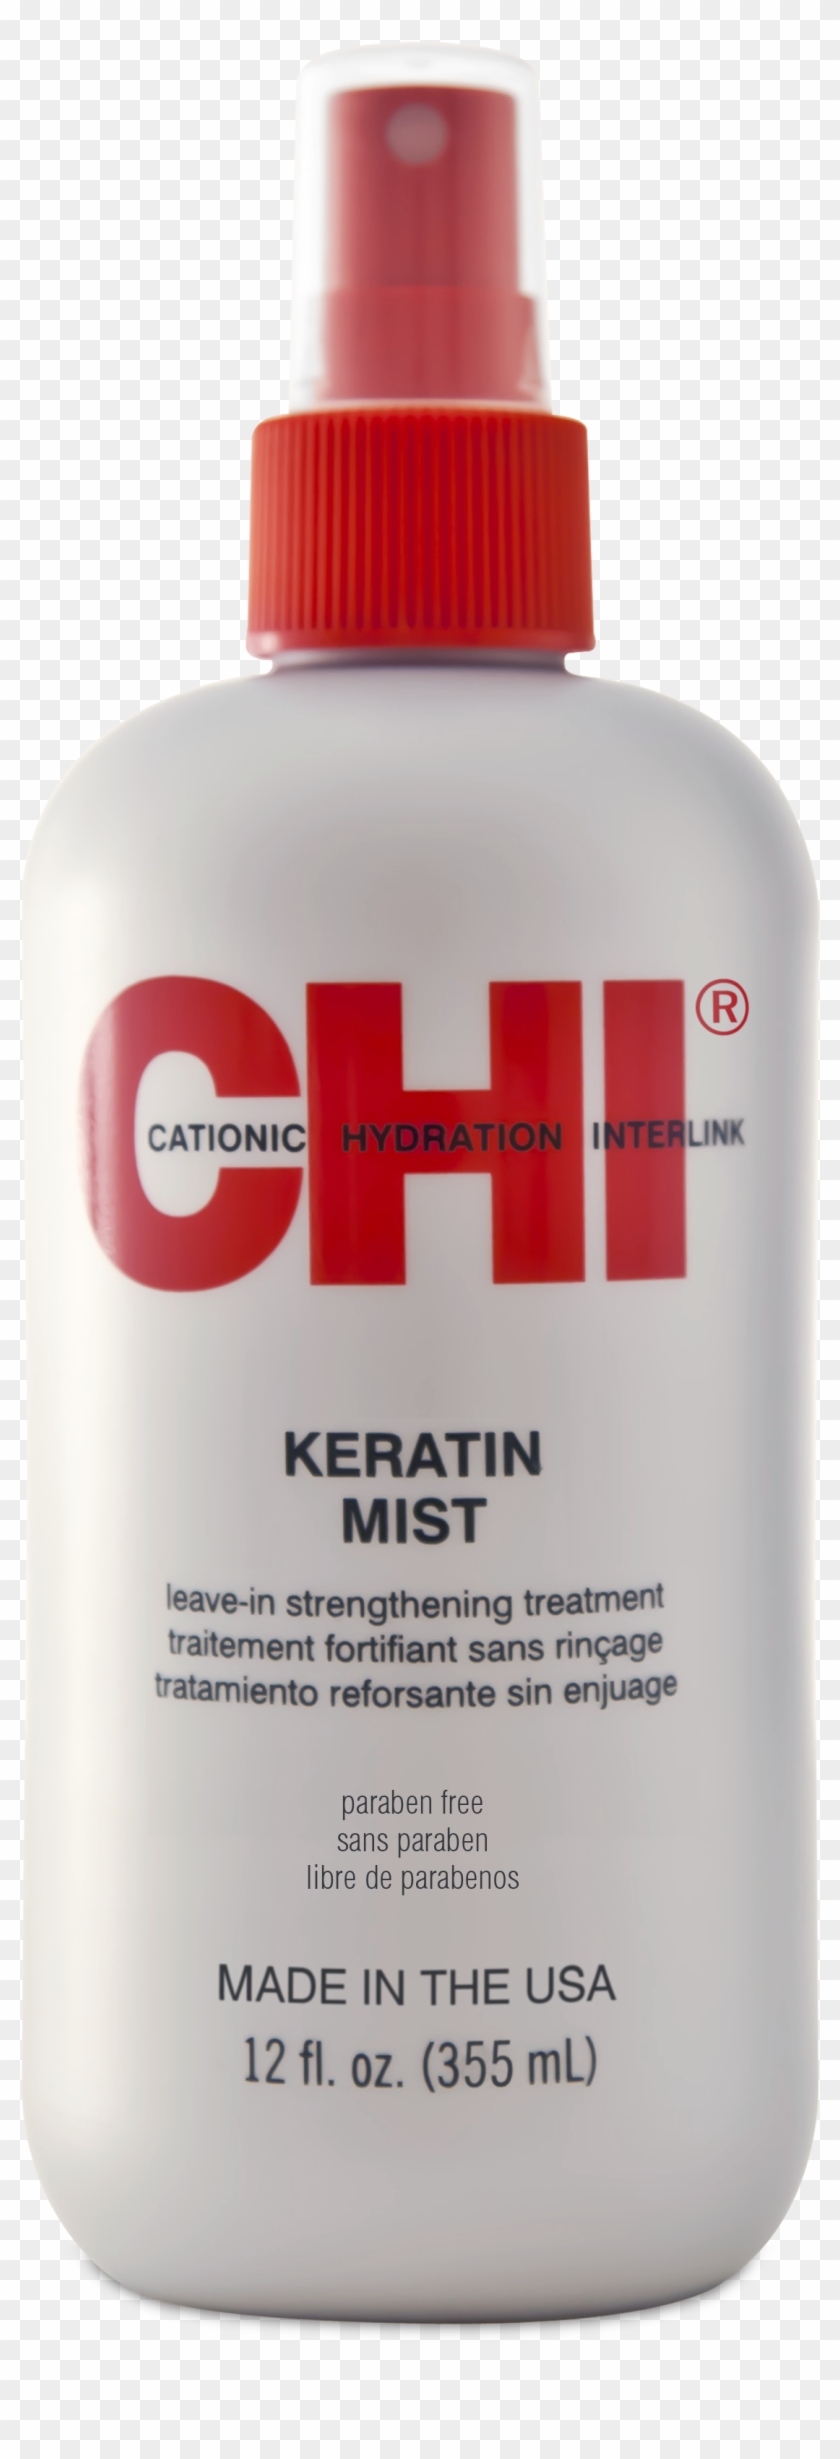 View Larger - Chi Keratin Mist Clipart #536540